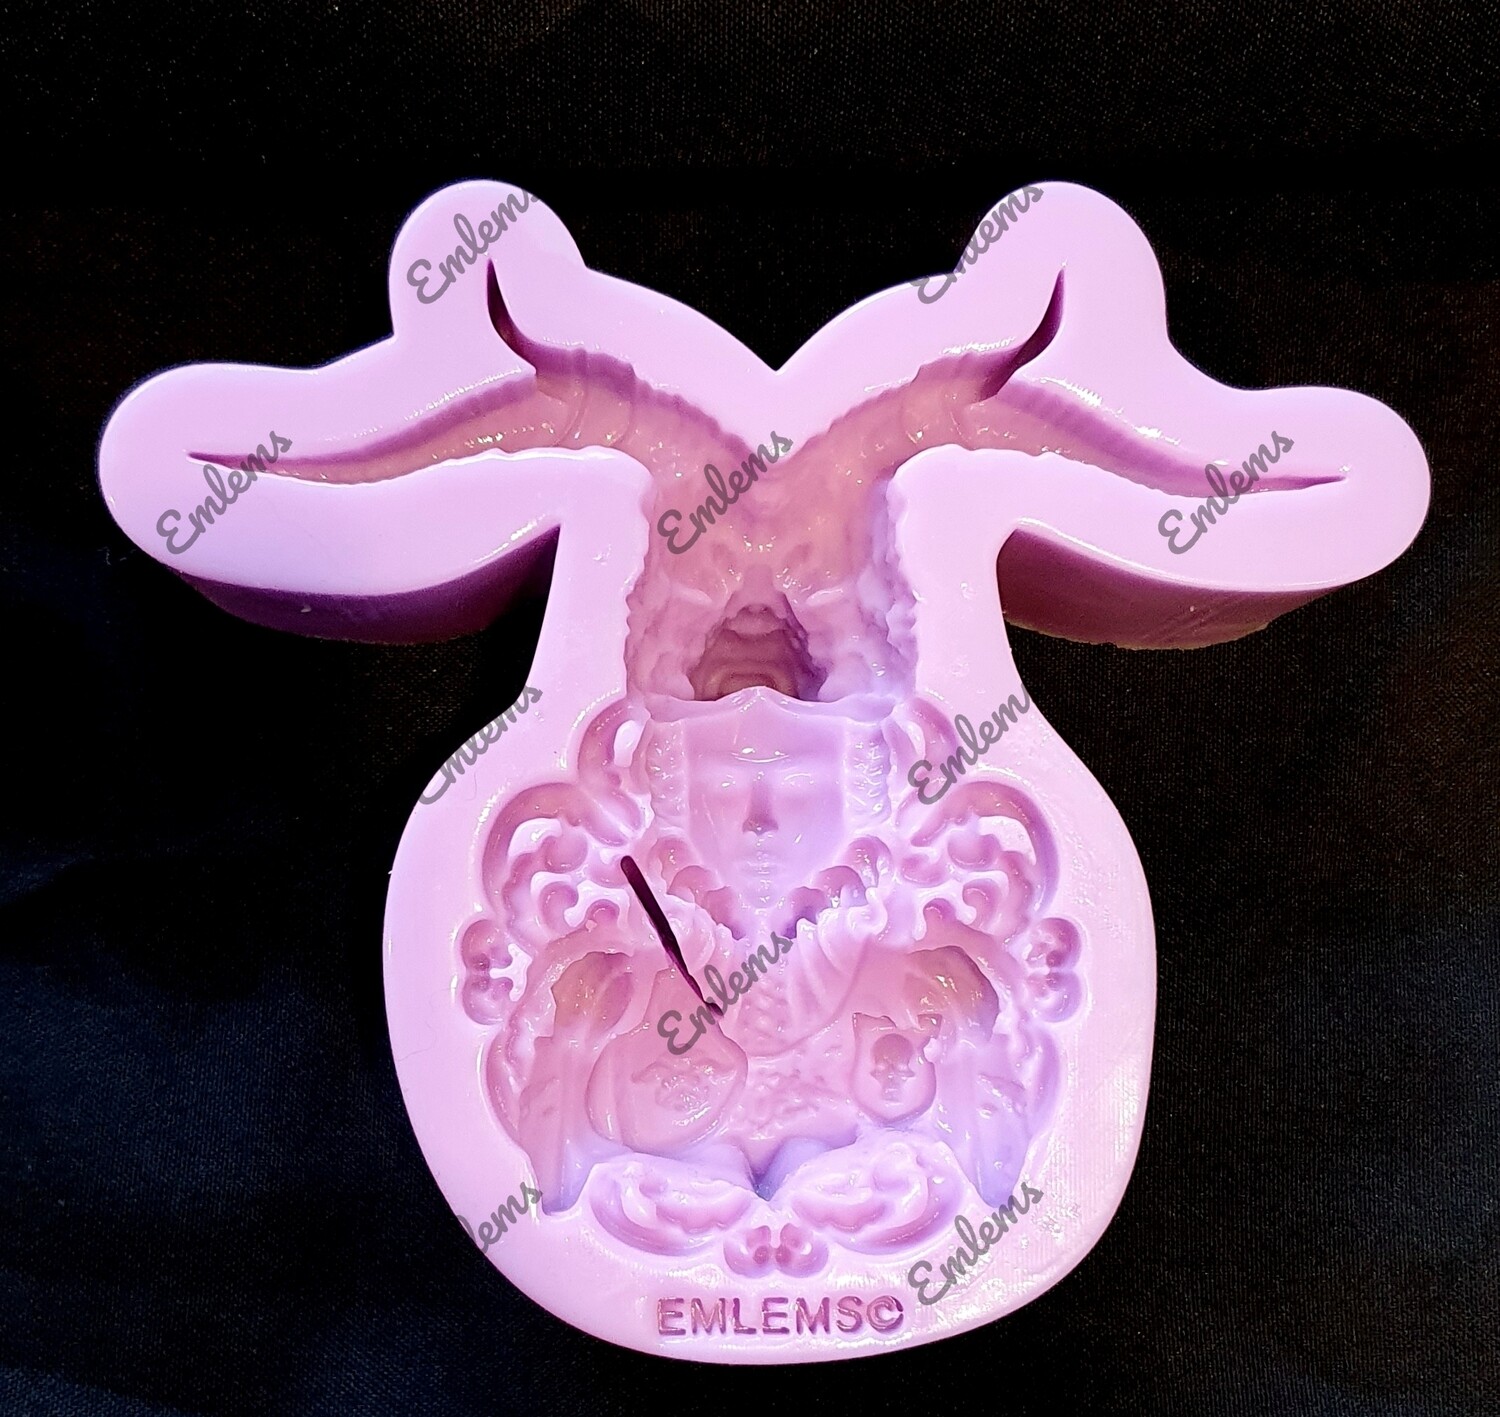 EMLEMS IRON LADY WOLF WOMAN SILICONE MOULD